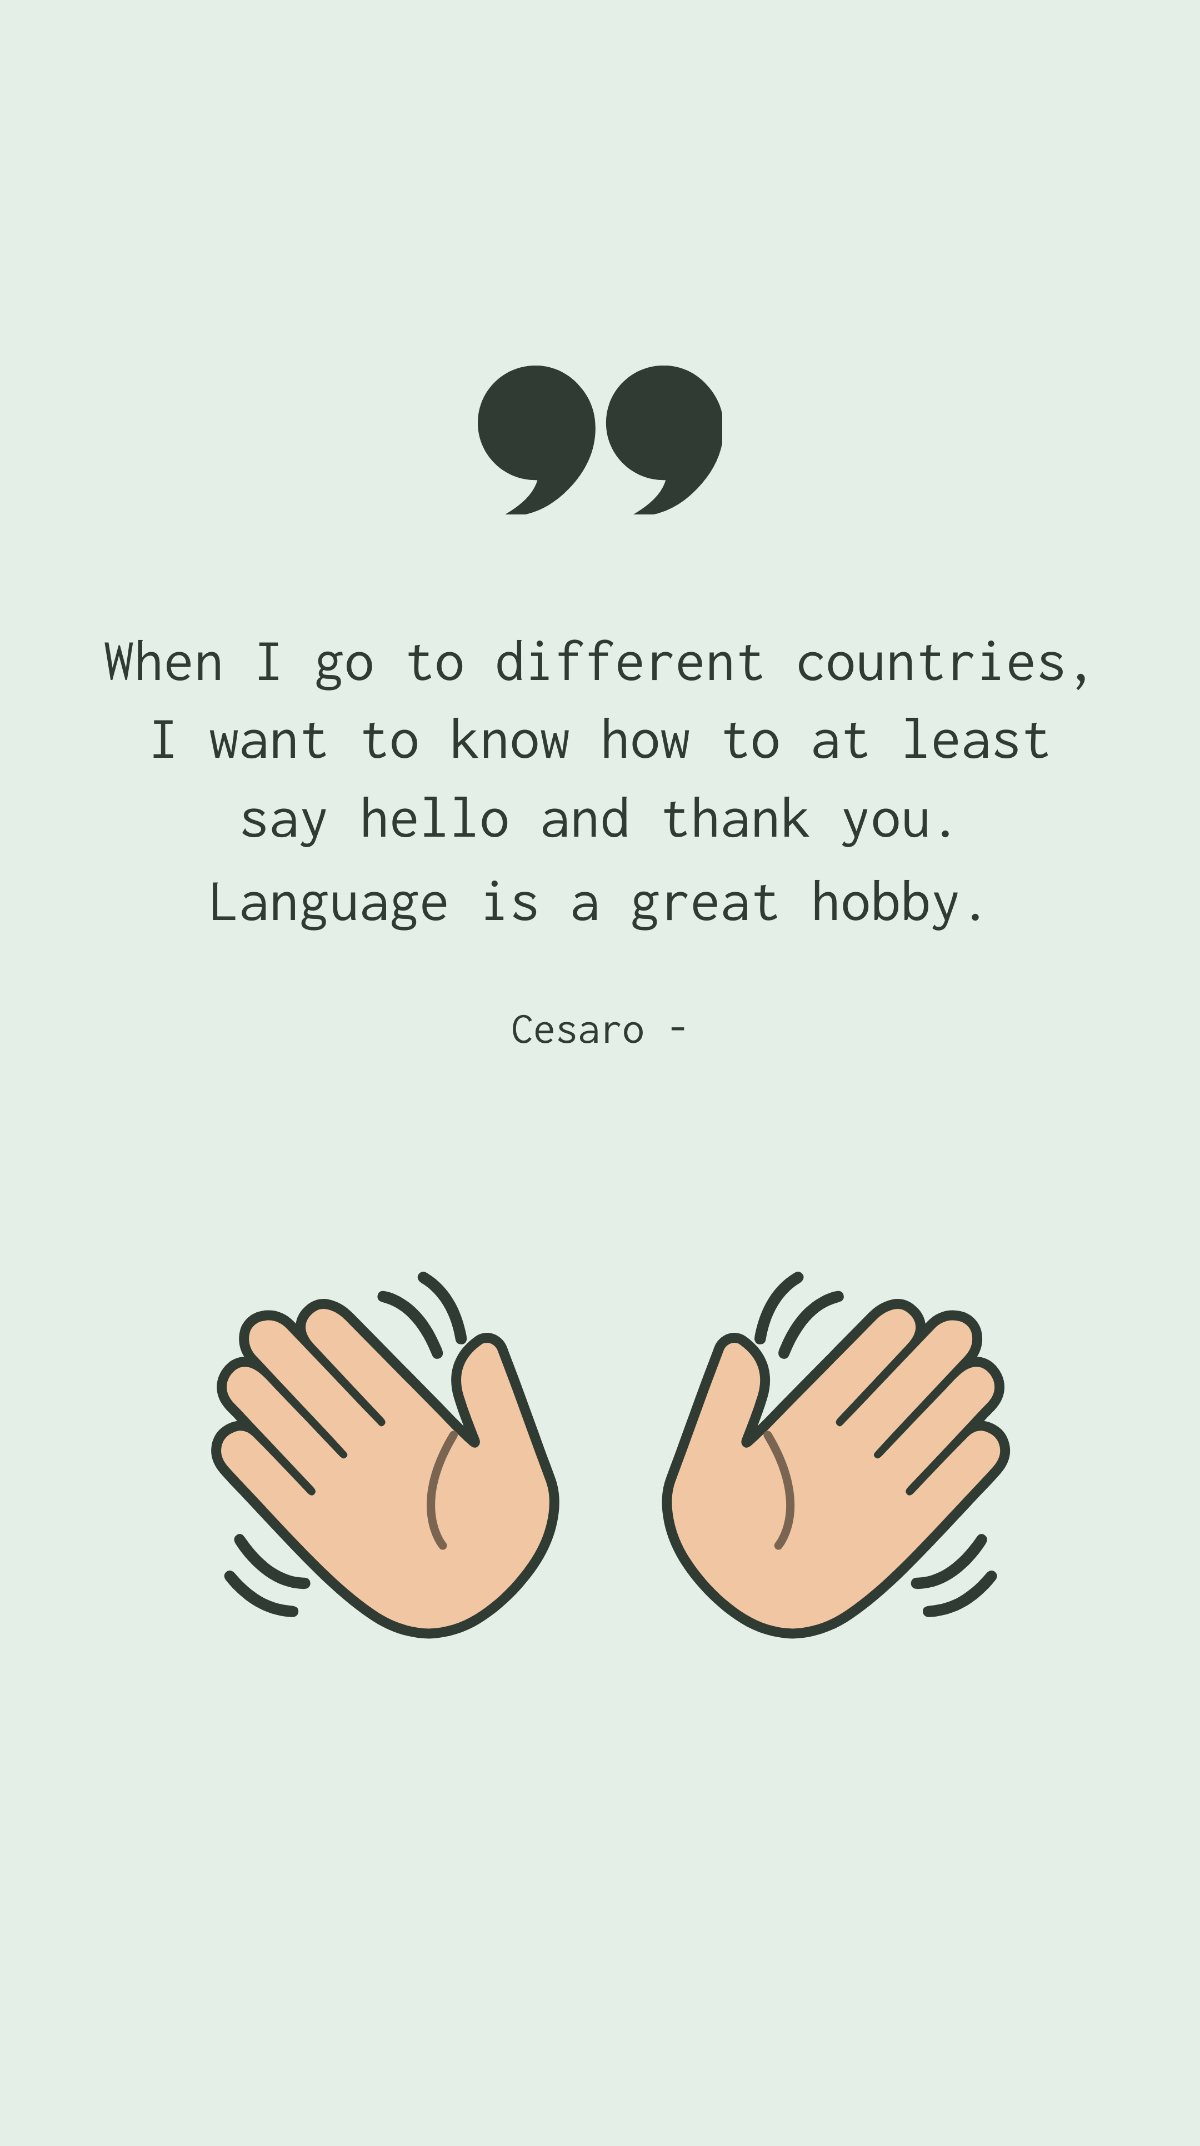 Cesaro - When I go to different countries, I want to know how to at least say hello and thank you. Language is a great hobby. Template